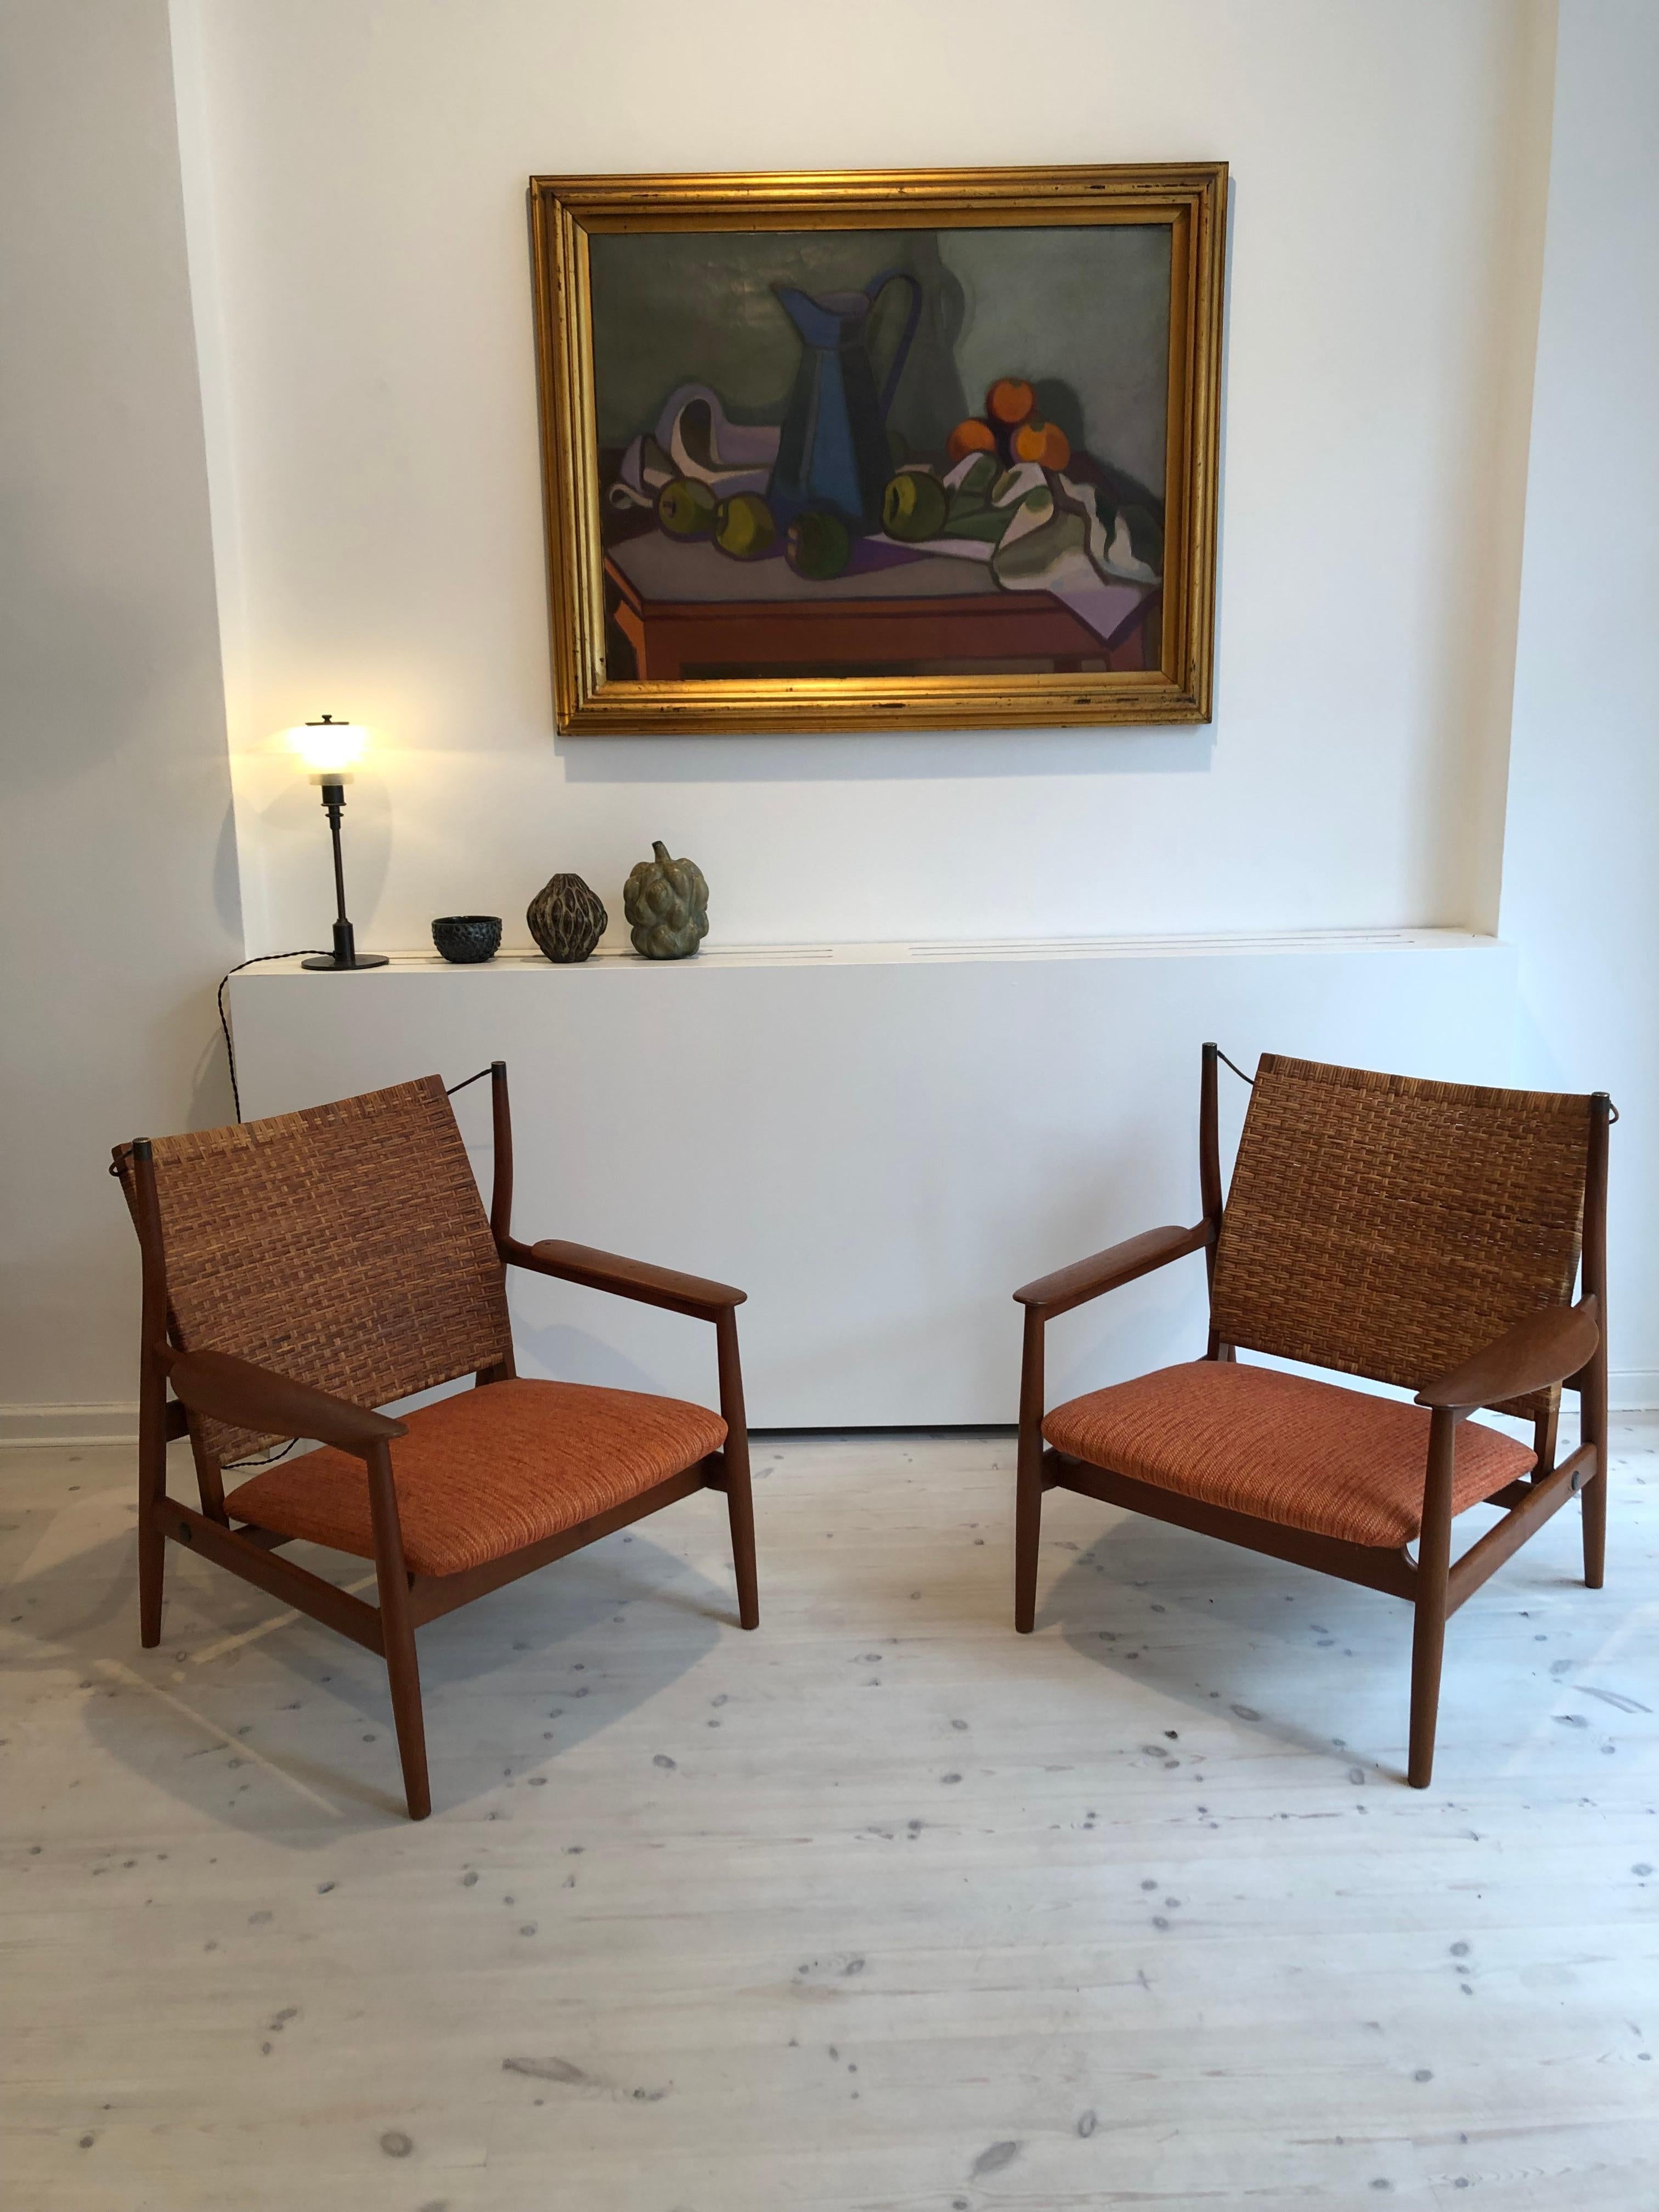 Mid-20th Century Finn Juhl Rare Pair of NV55 Armchairs in Teak and Cane for Niels Vodder, 1955